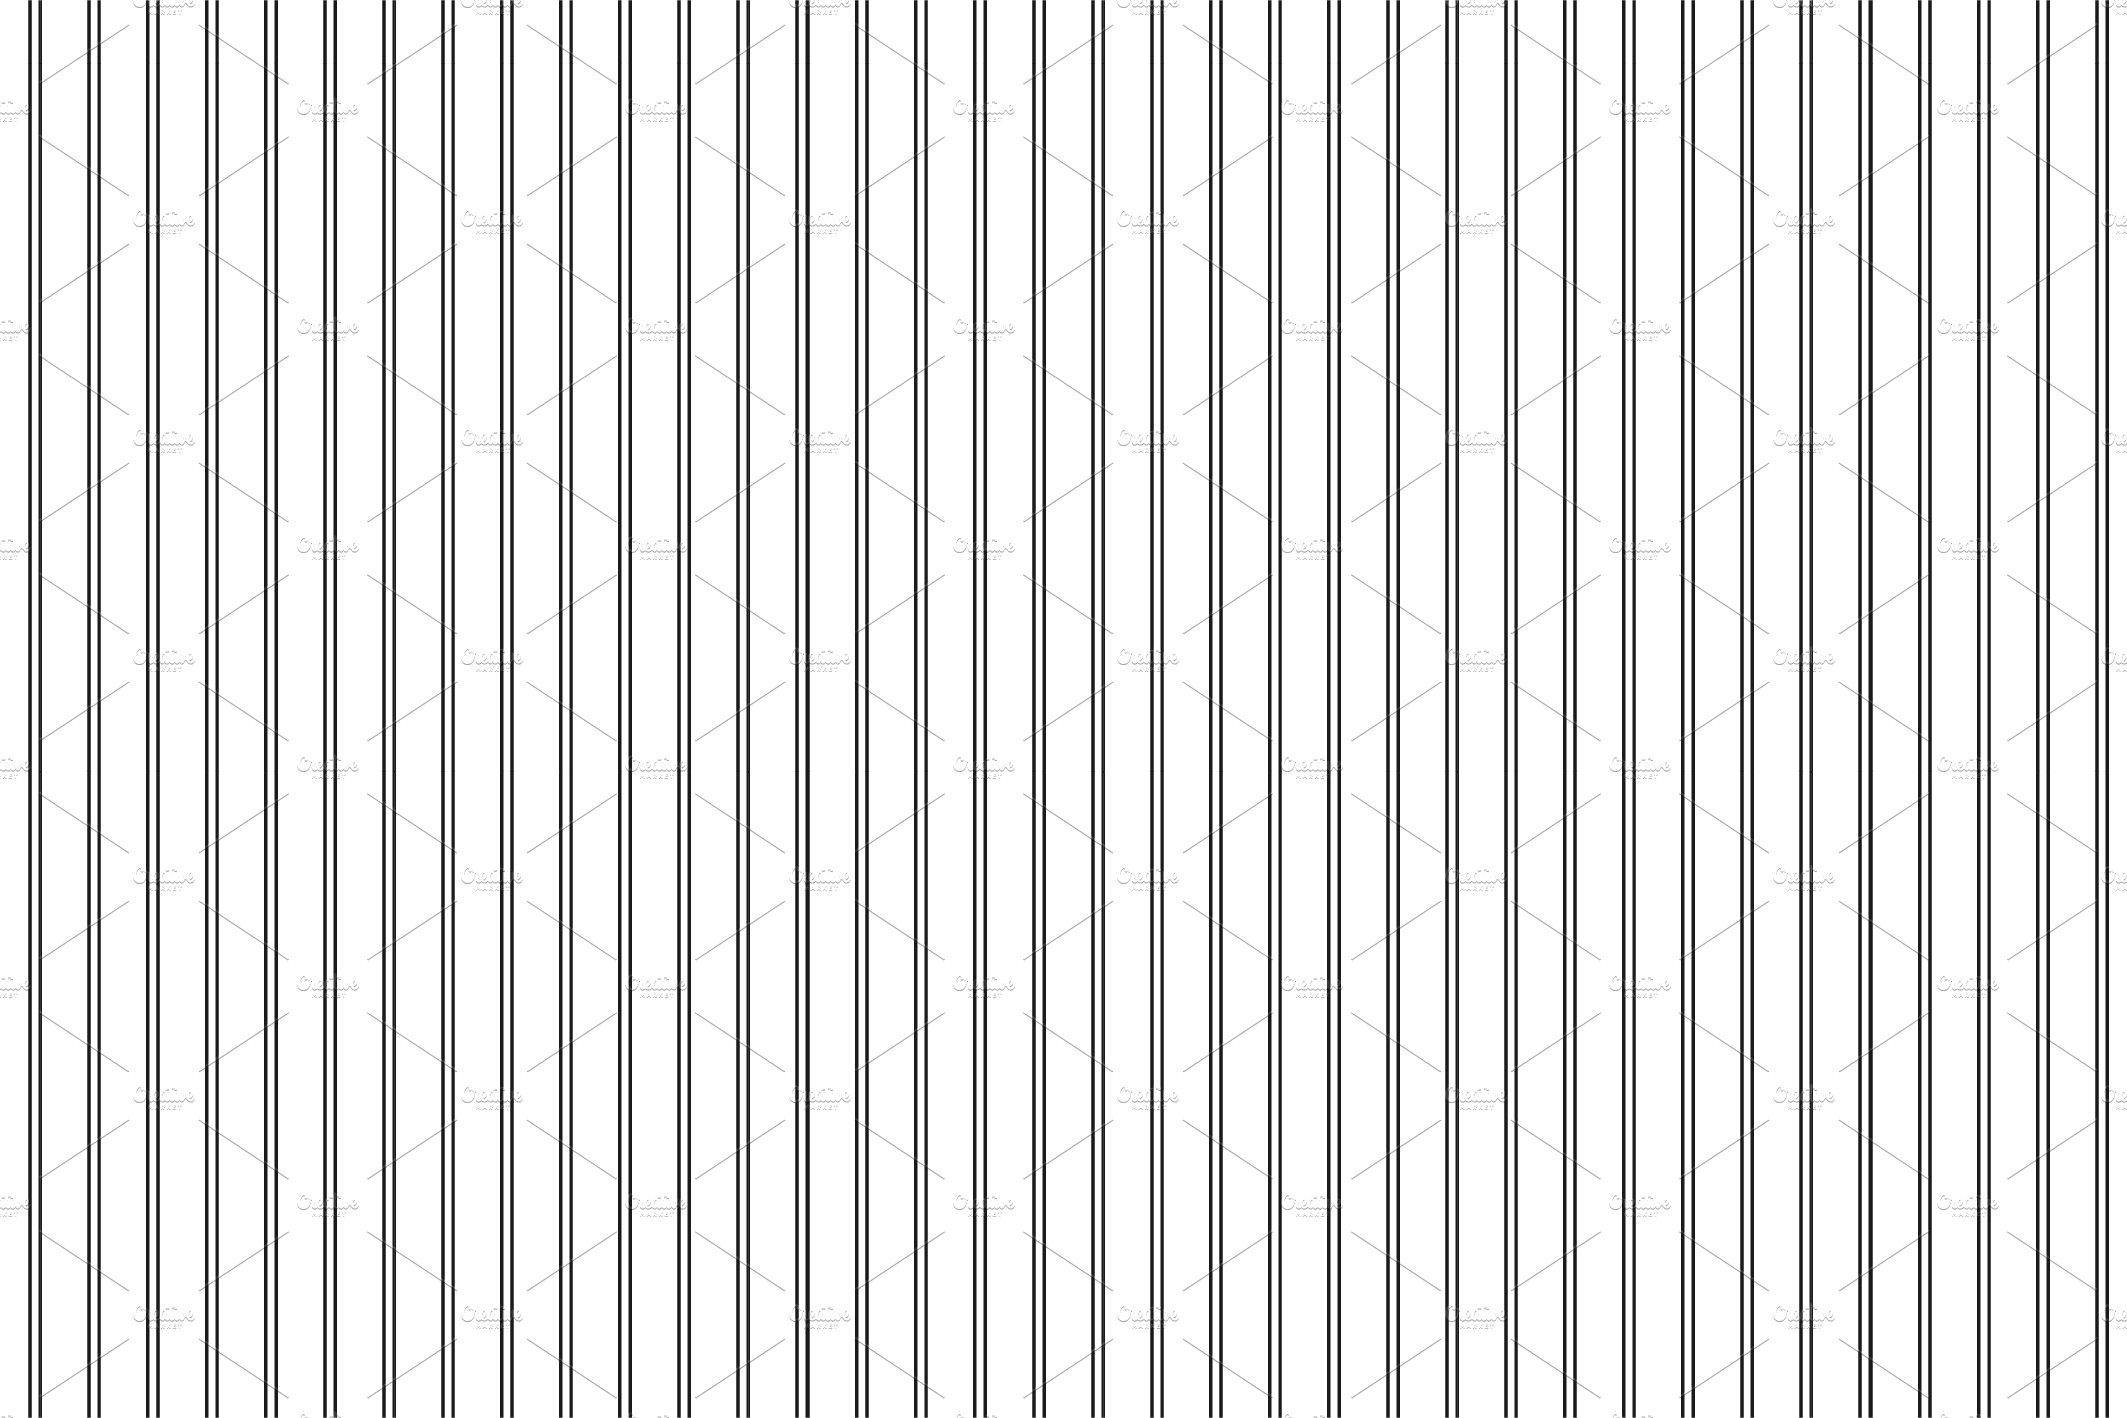 Thin vertical lines.